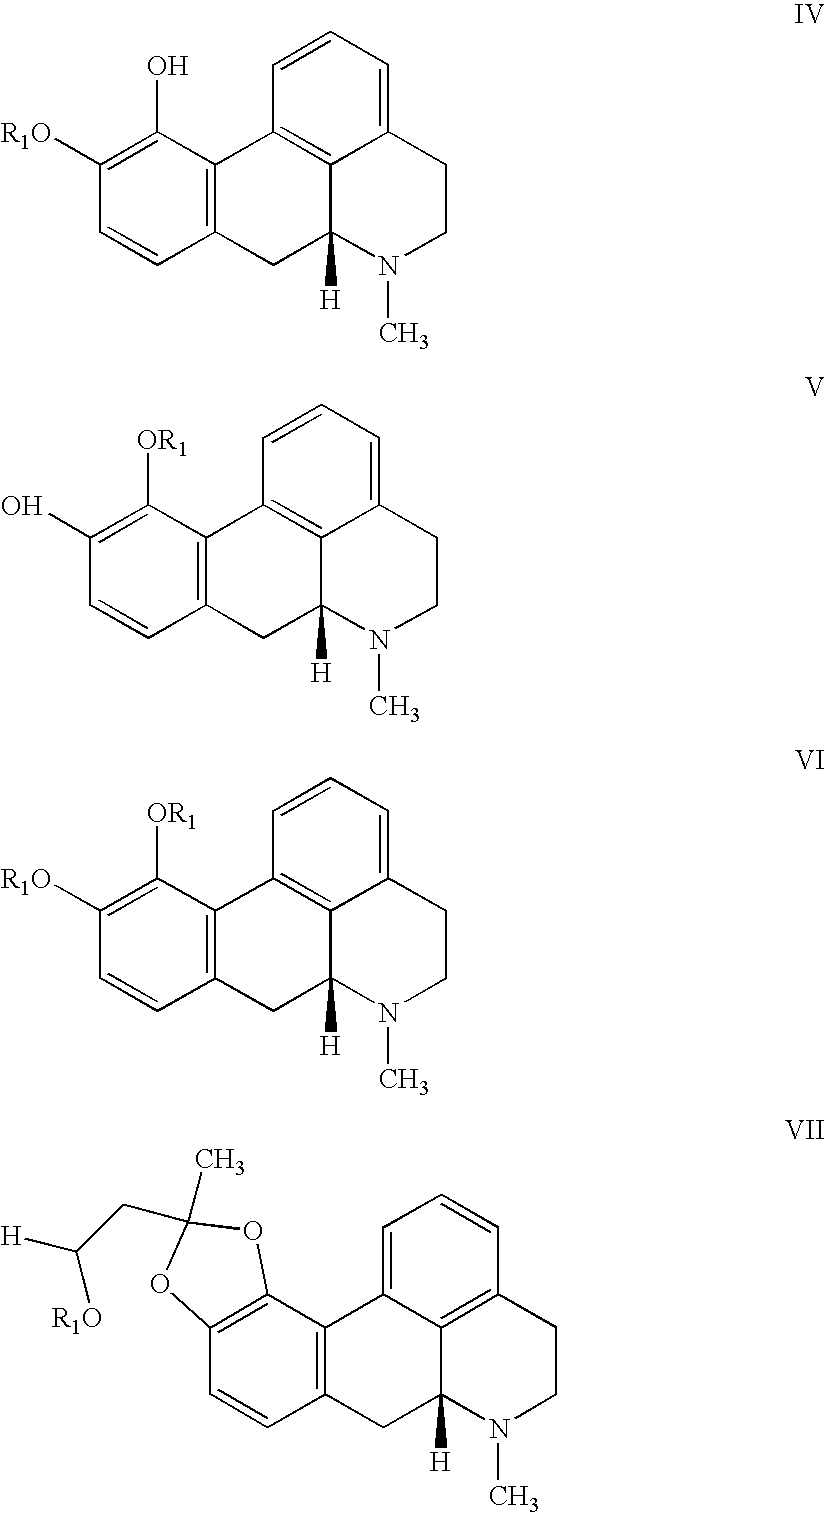 Glycoside and orthoester glycoside derivatives of apomorphine, analogs, and uses thereof